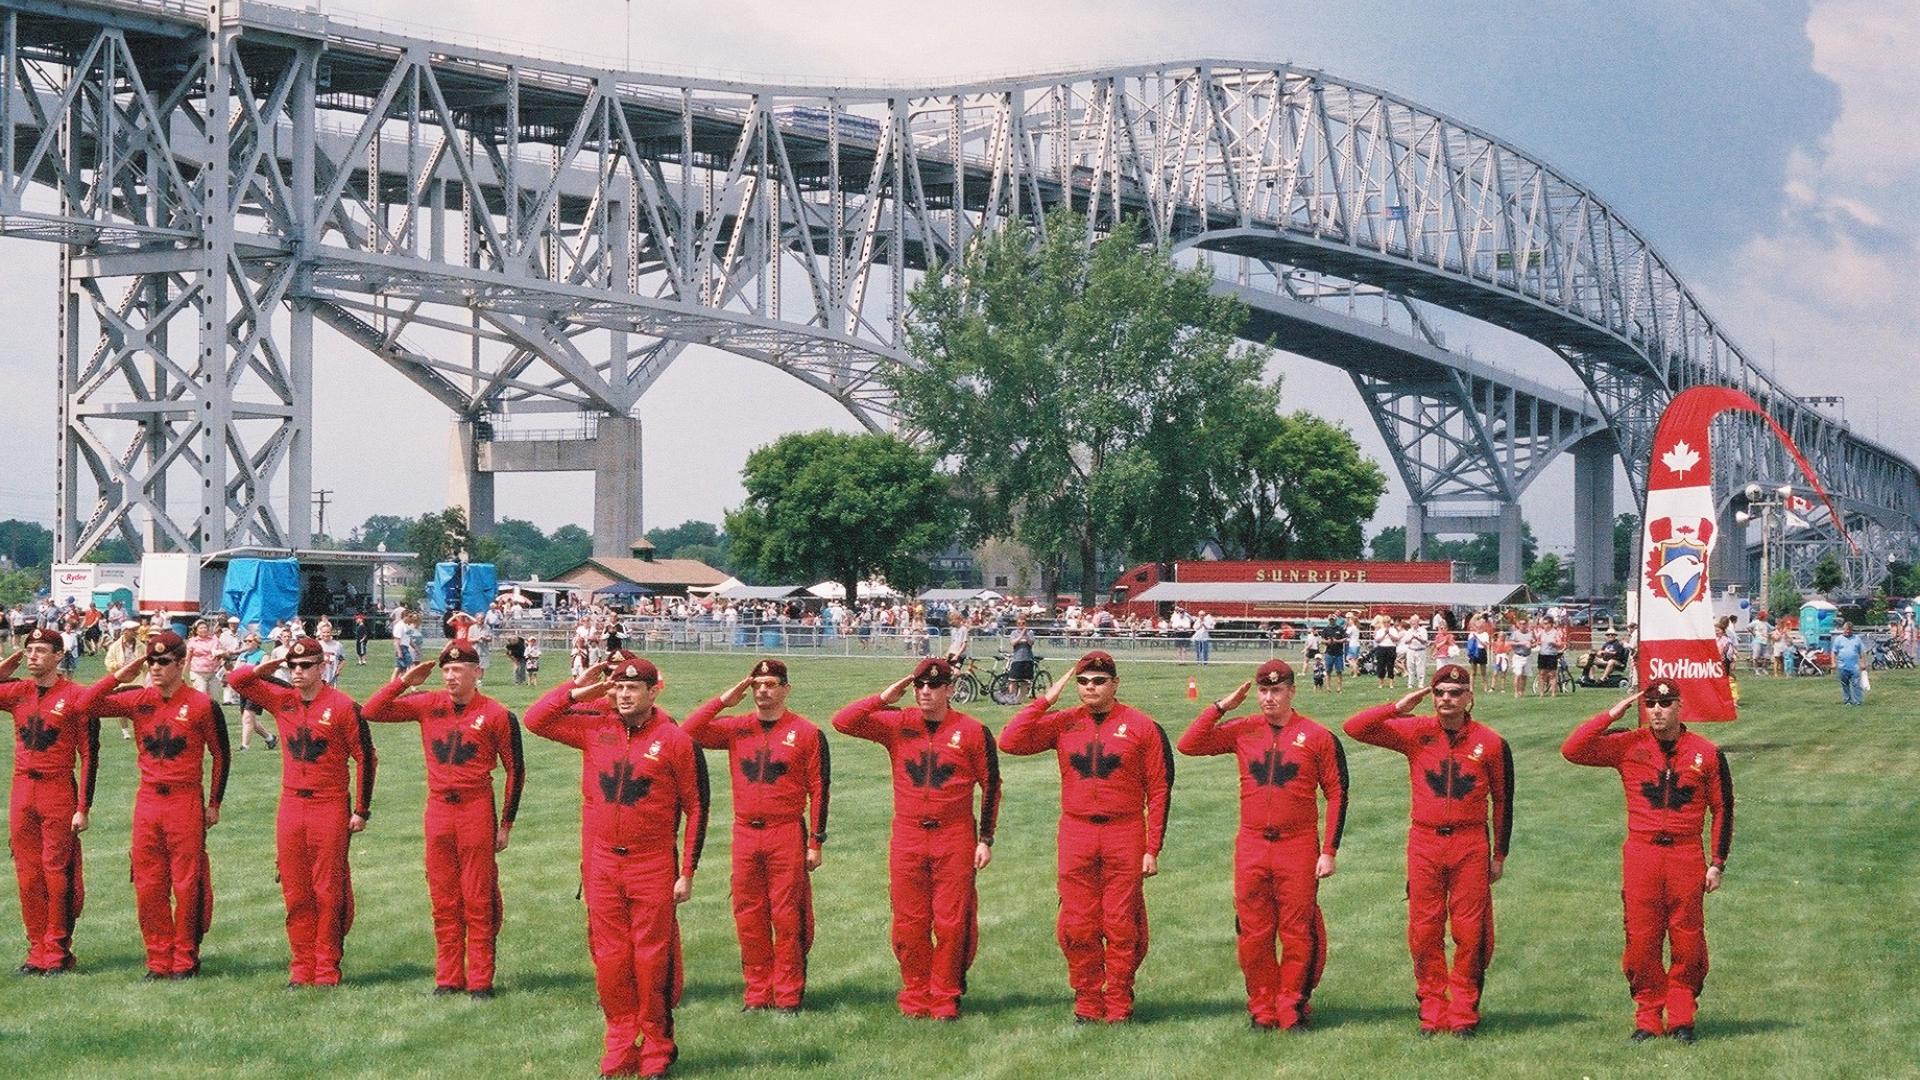 Group of men in red jumpsuits saluting facing forward. The bridge stands tall in the background.